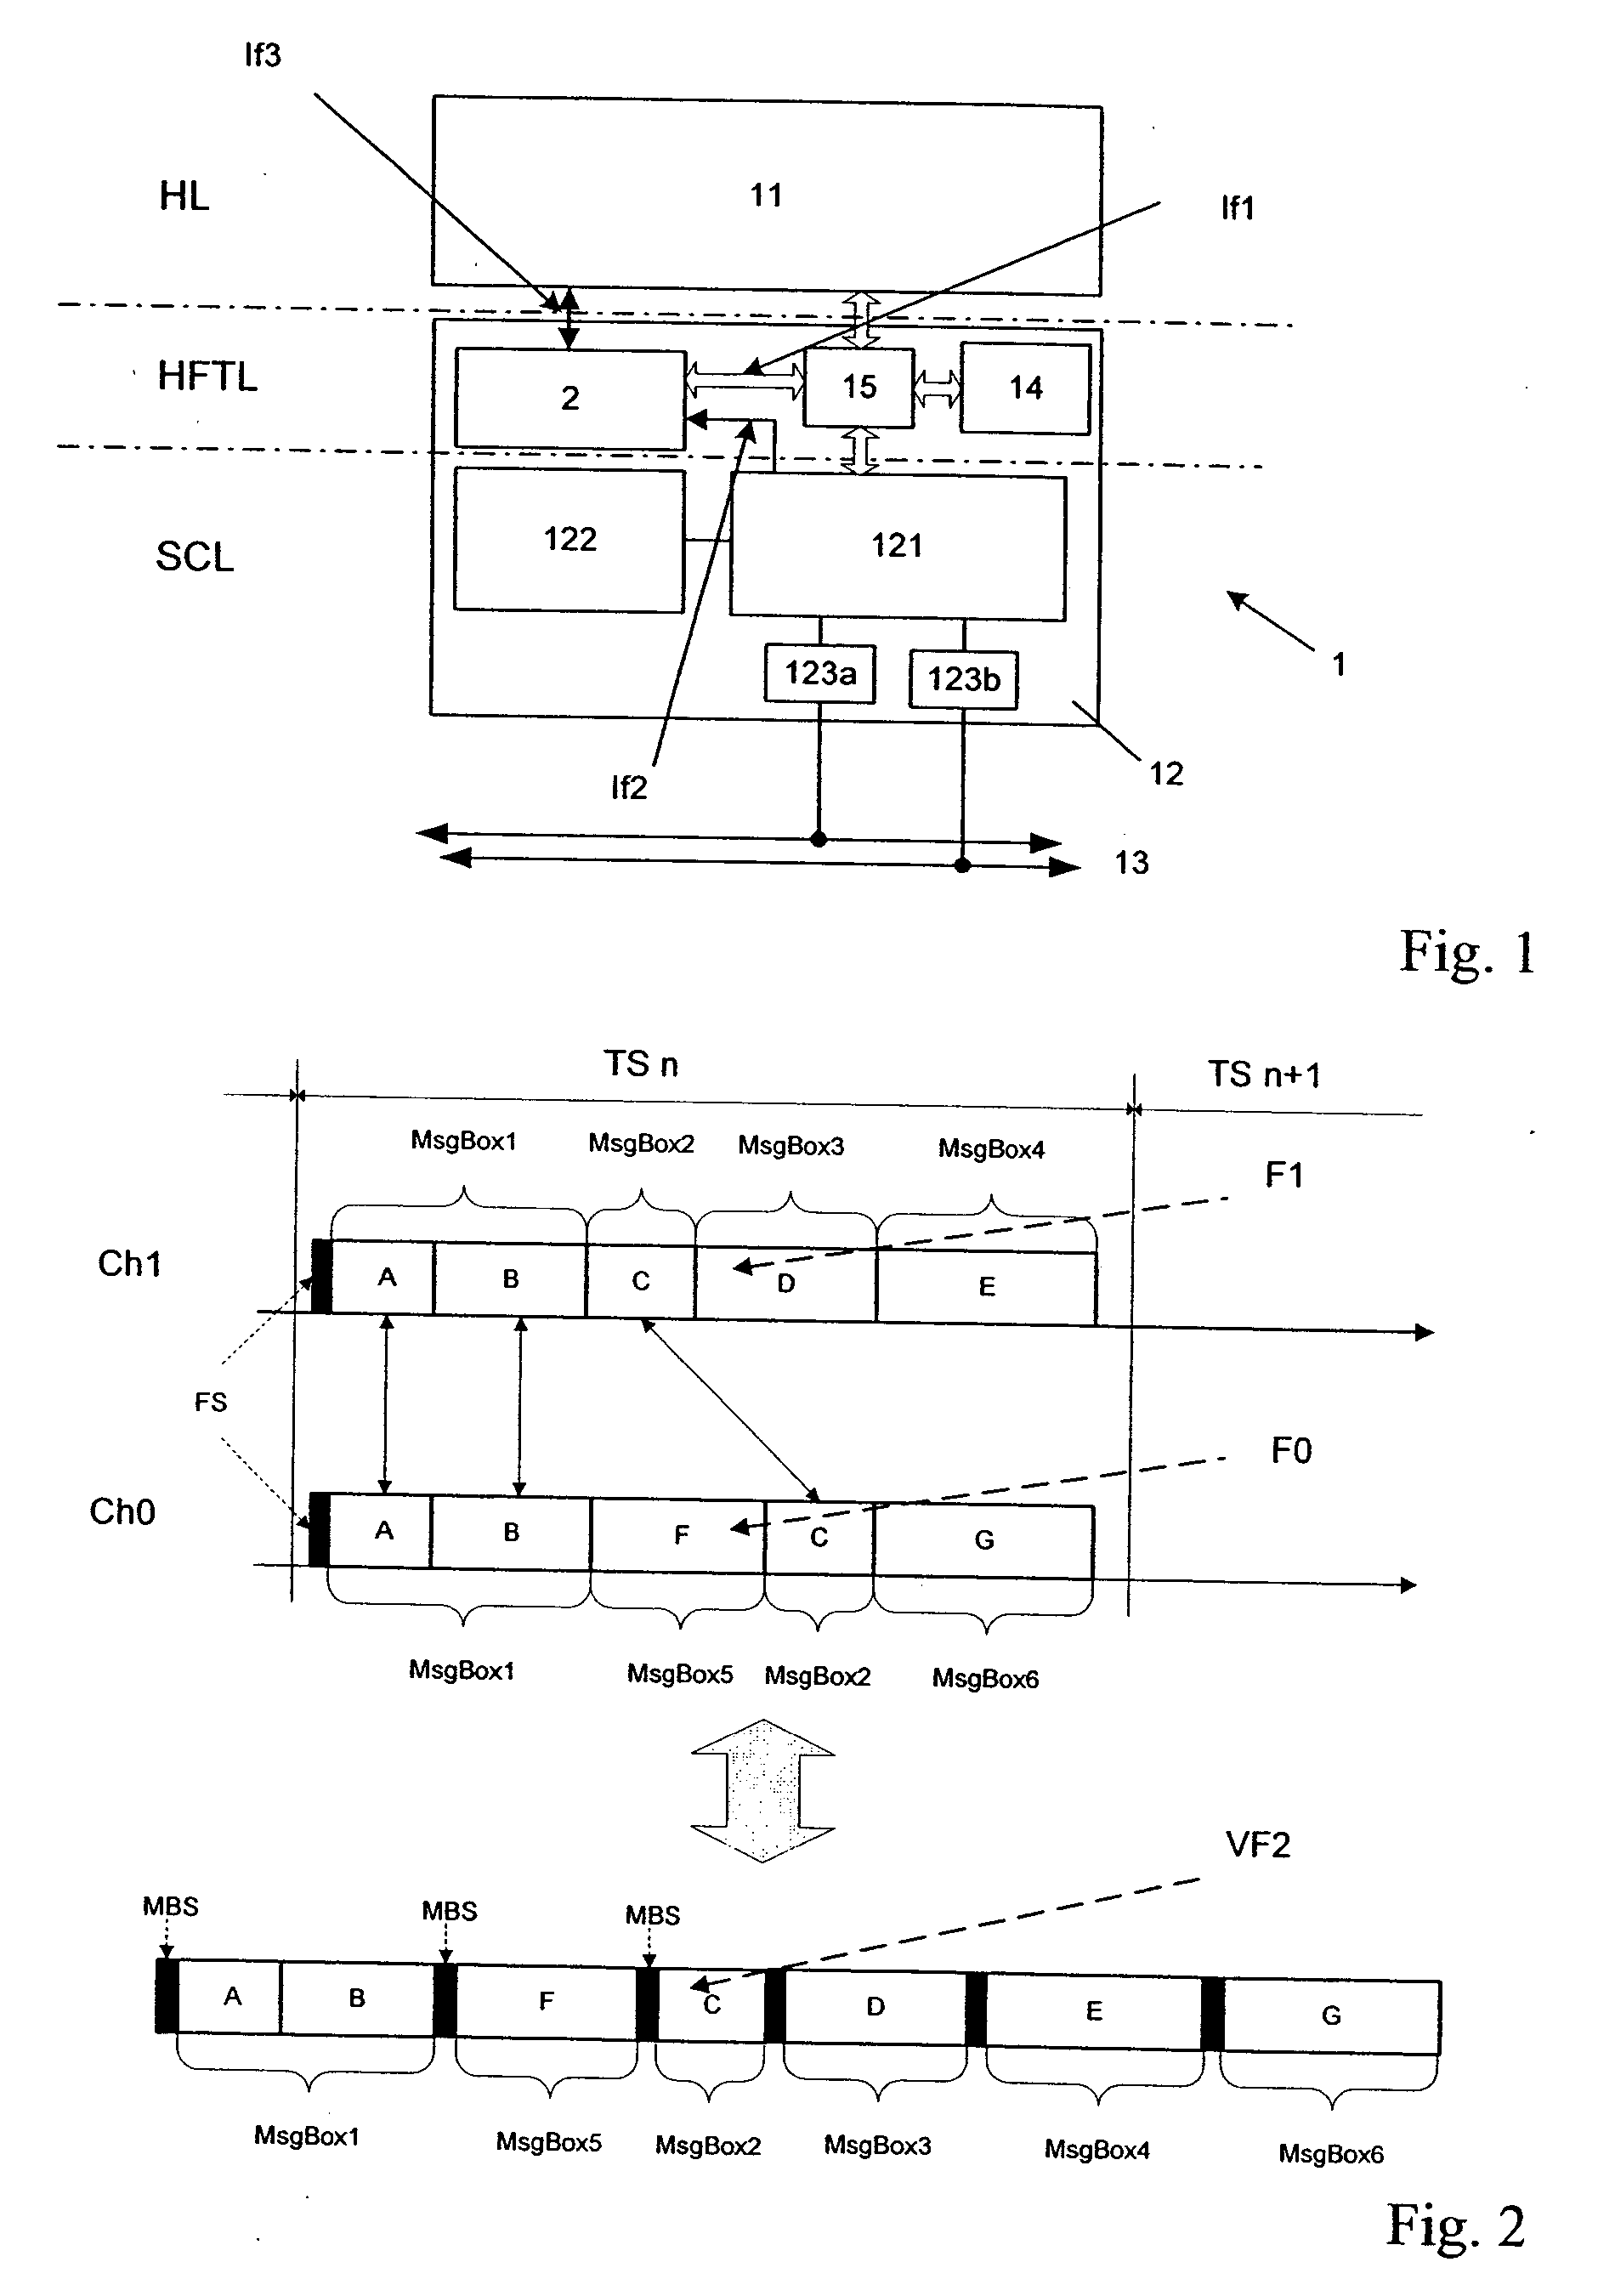 Processing of data frames exchanged over a communication controller in a time-triggered system